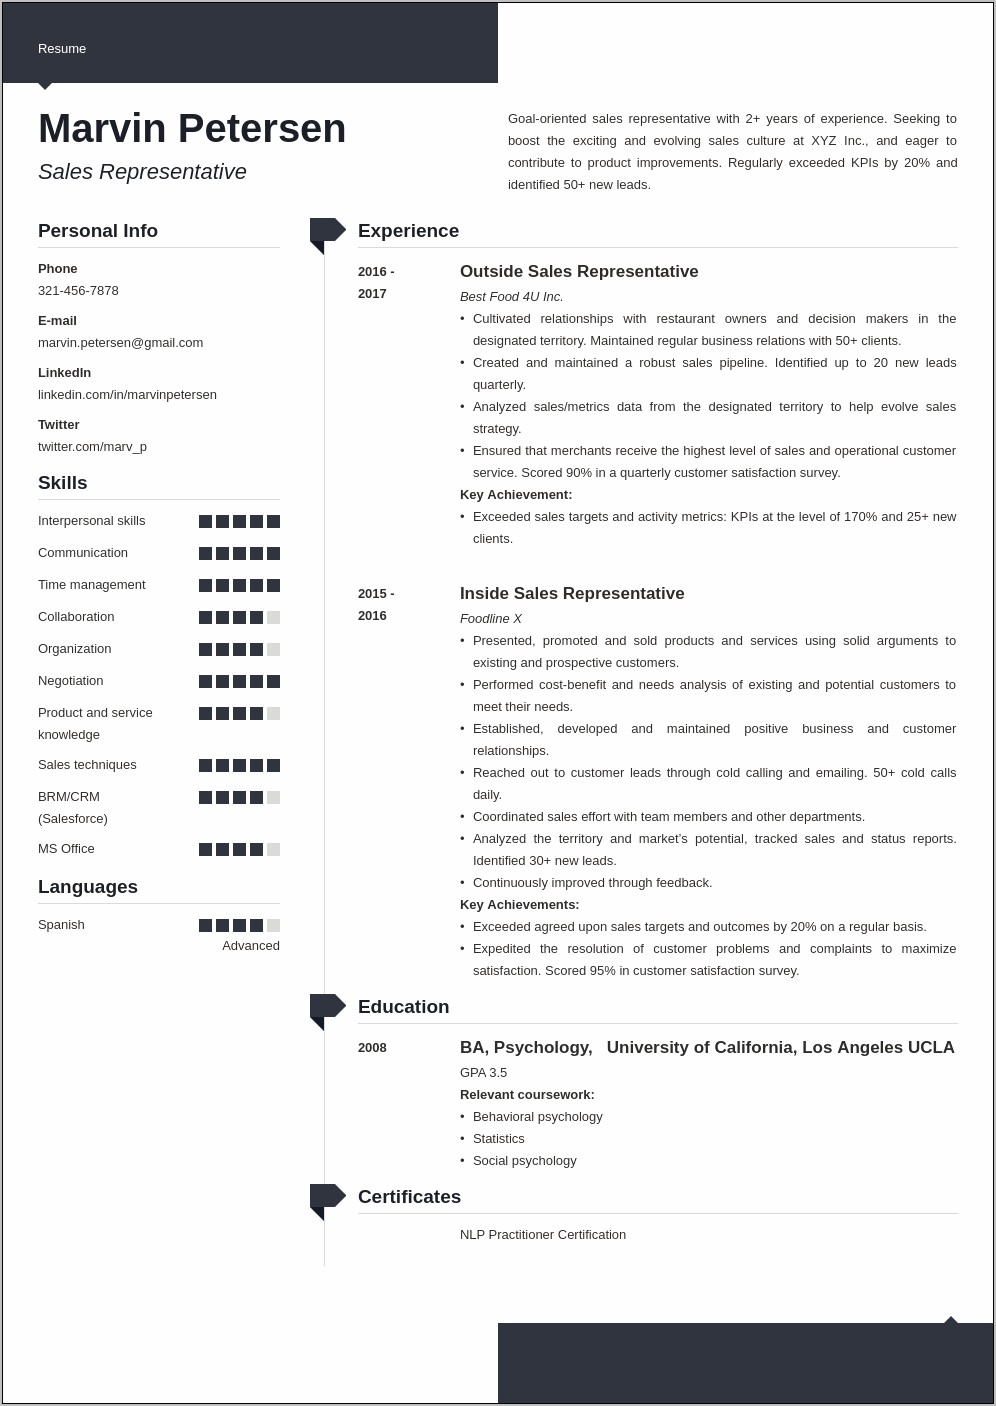 Salesforce Sample Resume With Sales Process